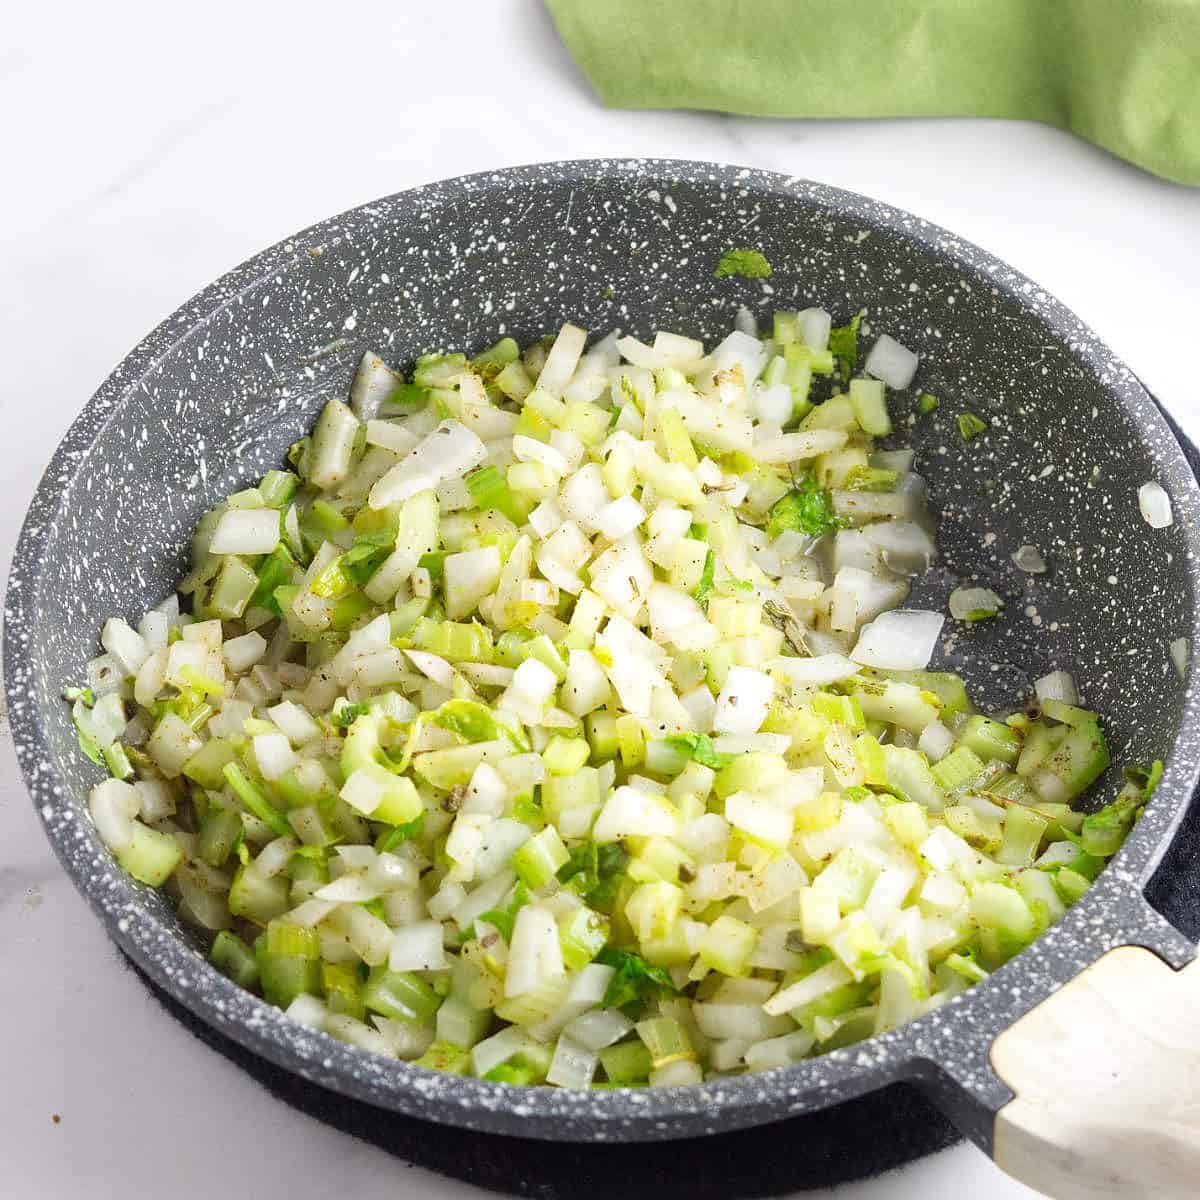 sauteed onions and celery in a saucepan.